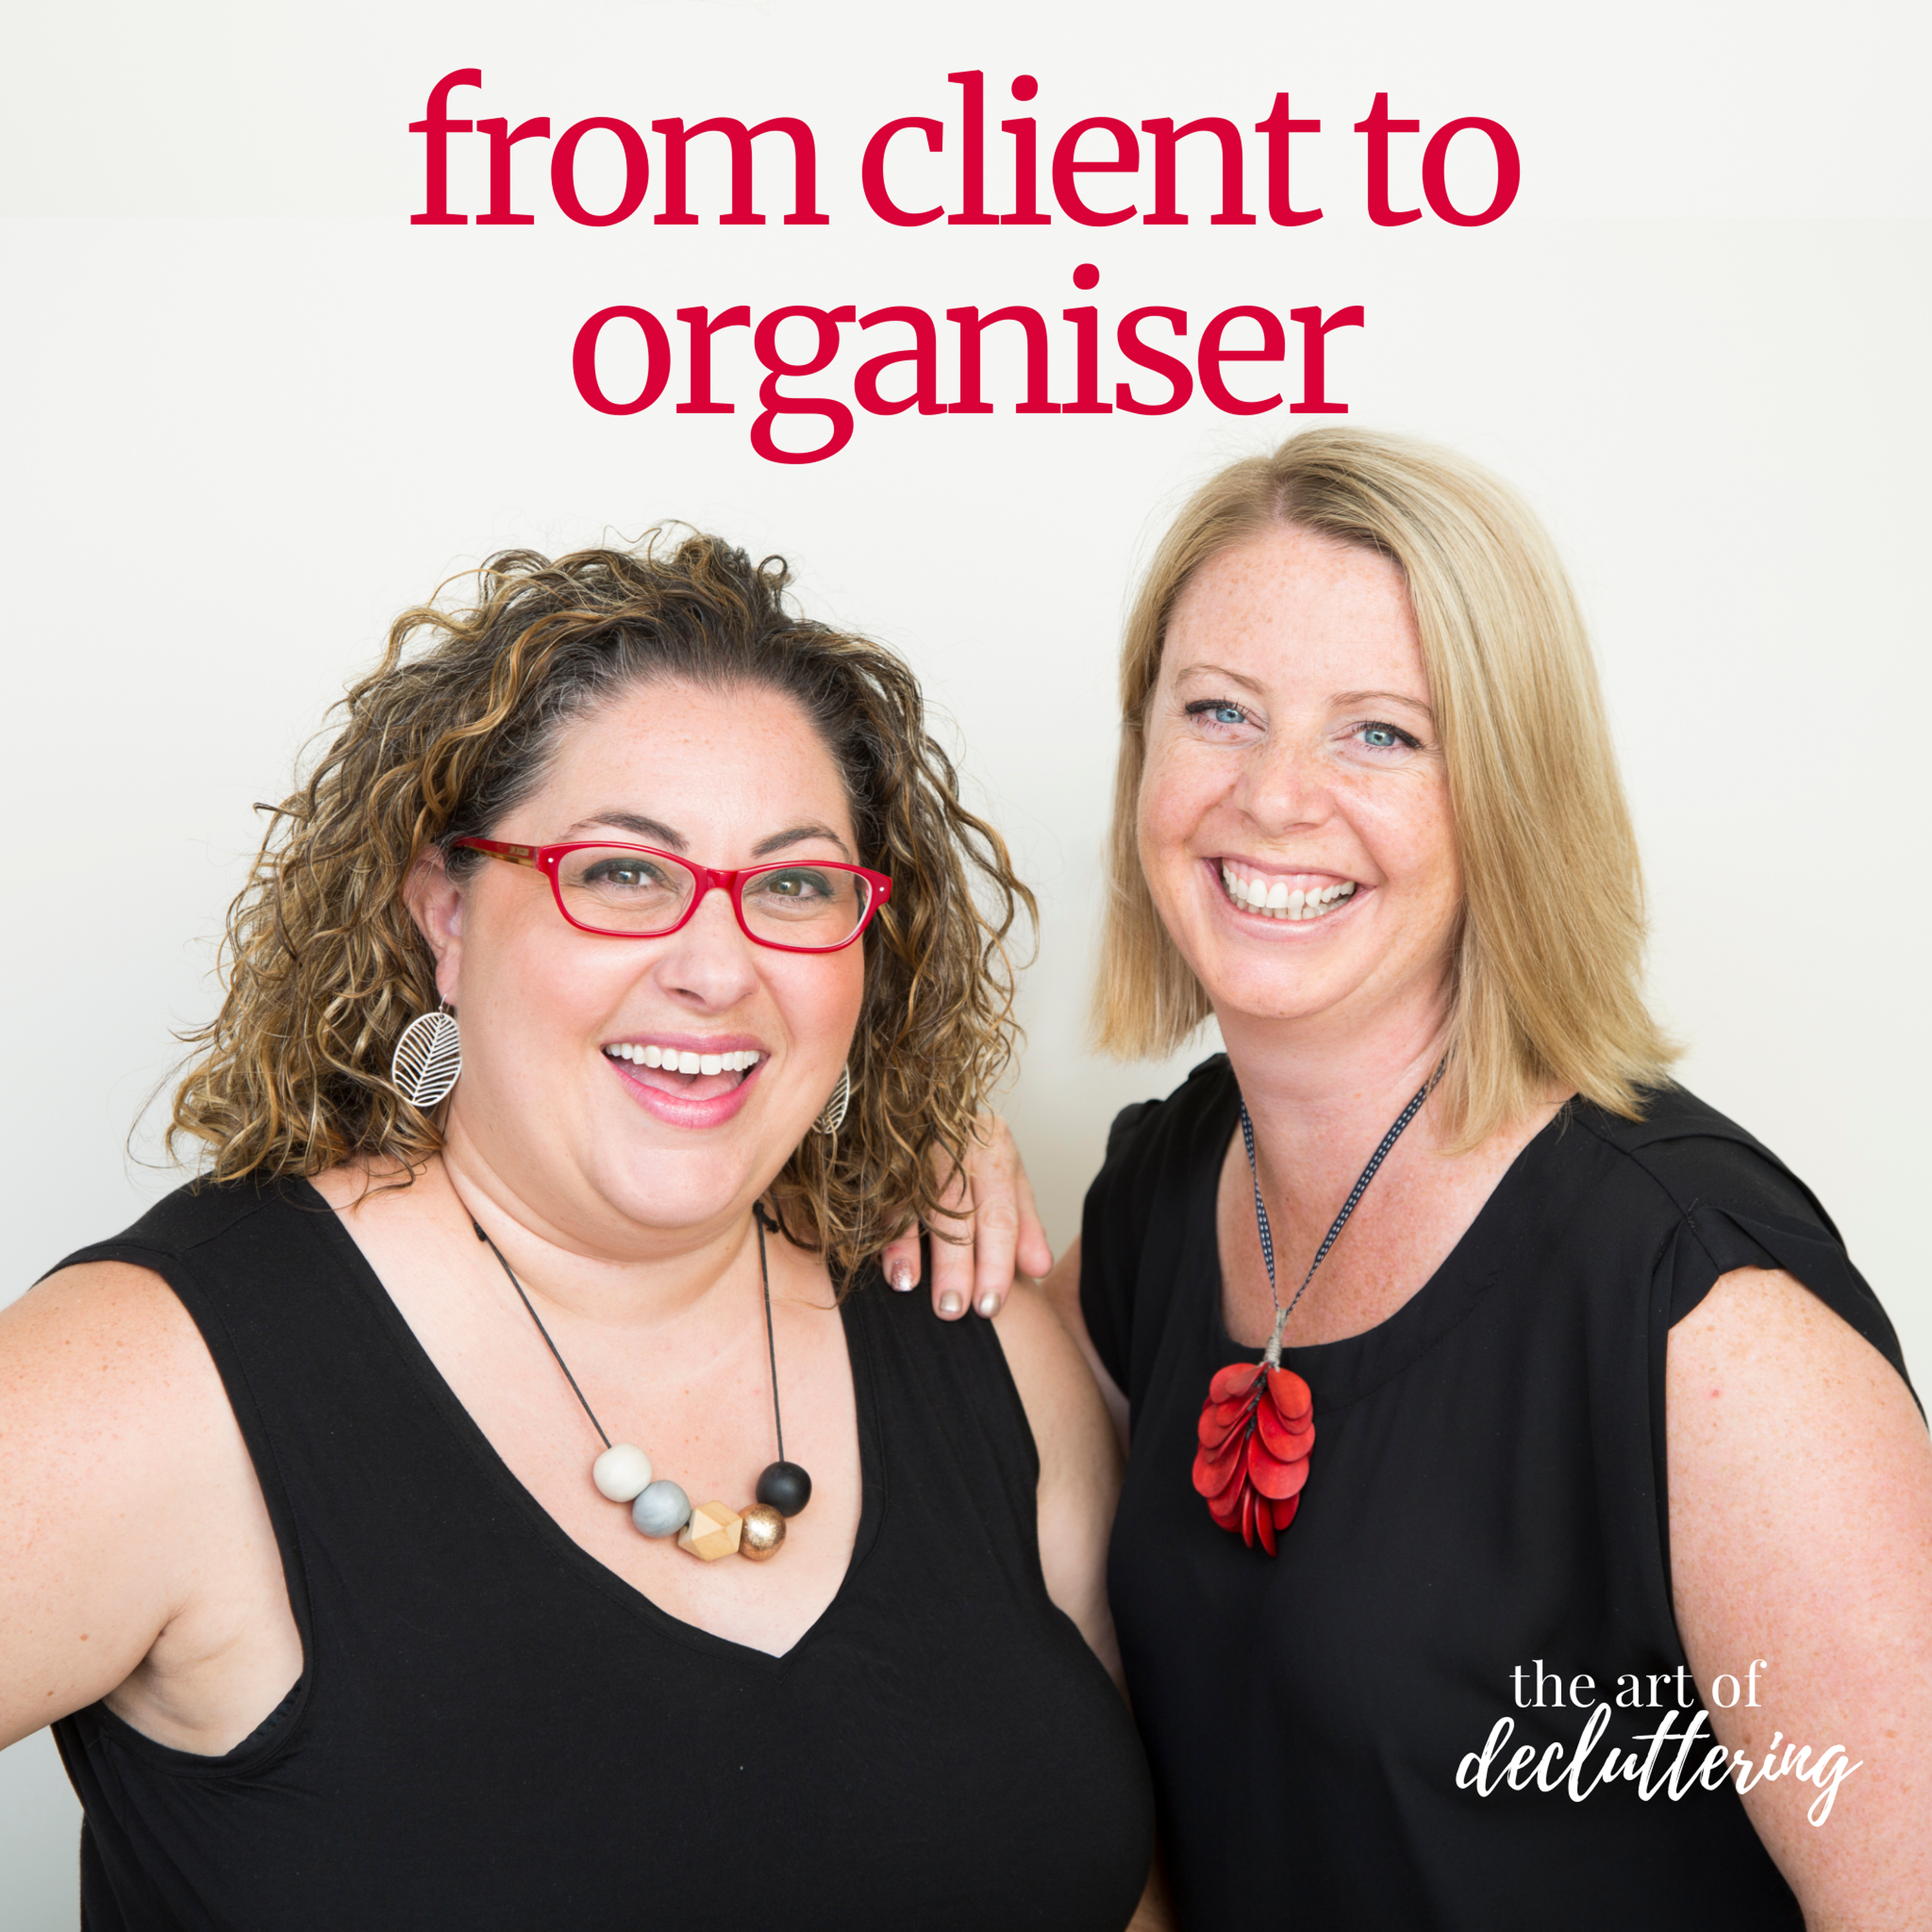 From Client to Organiser